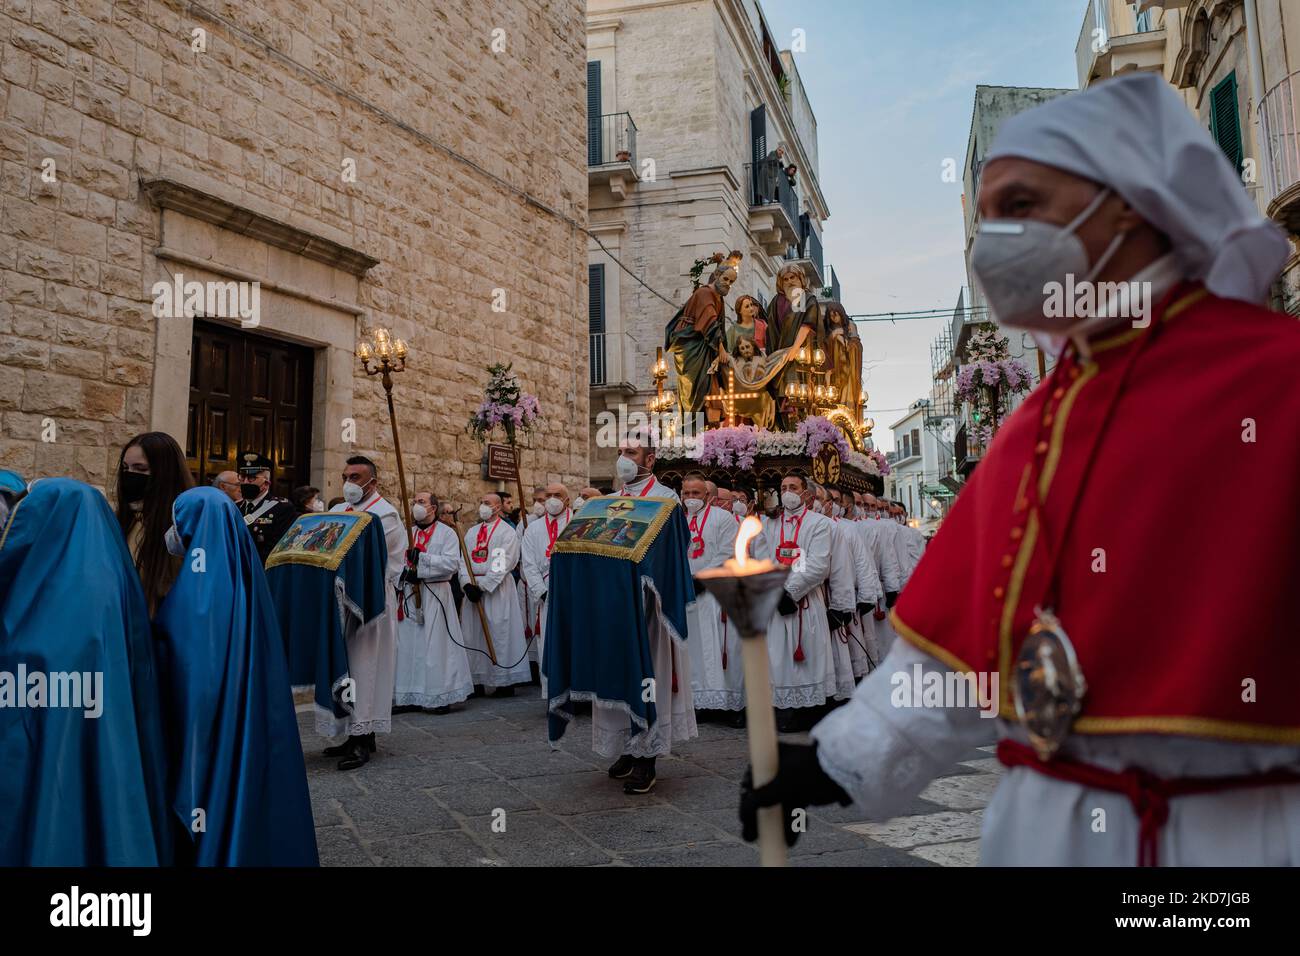 The Eight Saints, on Holy Thursday in procession in Ruvo di Puglia on April 14, 2022. After a two-year stop for the most acute phase of the Covid pandemic, the night of the Eight Saints has returned, as popular tradition calls the statuary group of the 'Transport of Christ to the Sepulcher', which, since 1920, has been conducted in procession by associates of the Confraternity Opera Pia San Rocco in Ruvo di Puglia, starting from the homonymous church where the statues are venerated. At 2 o'clock this night, Holy Thursday, in Piazza Menotti Garibaldi, the foot march took place by the 'N. Cassan Stock Photo